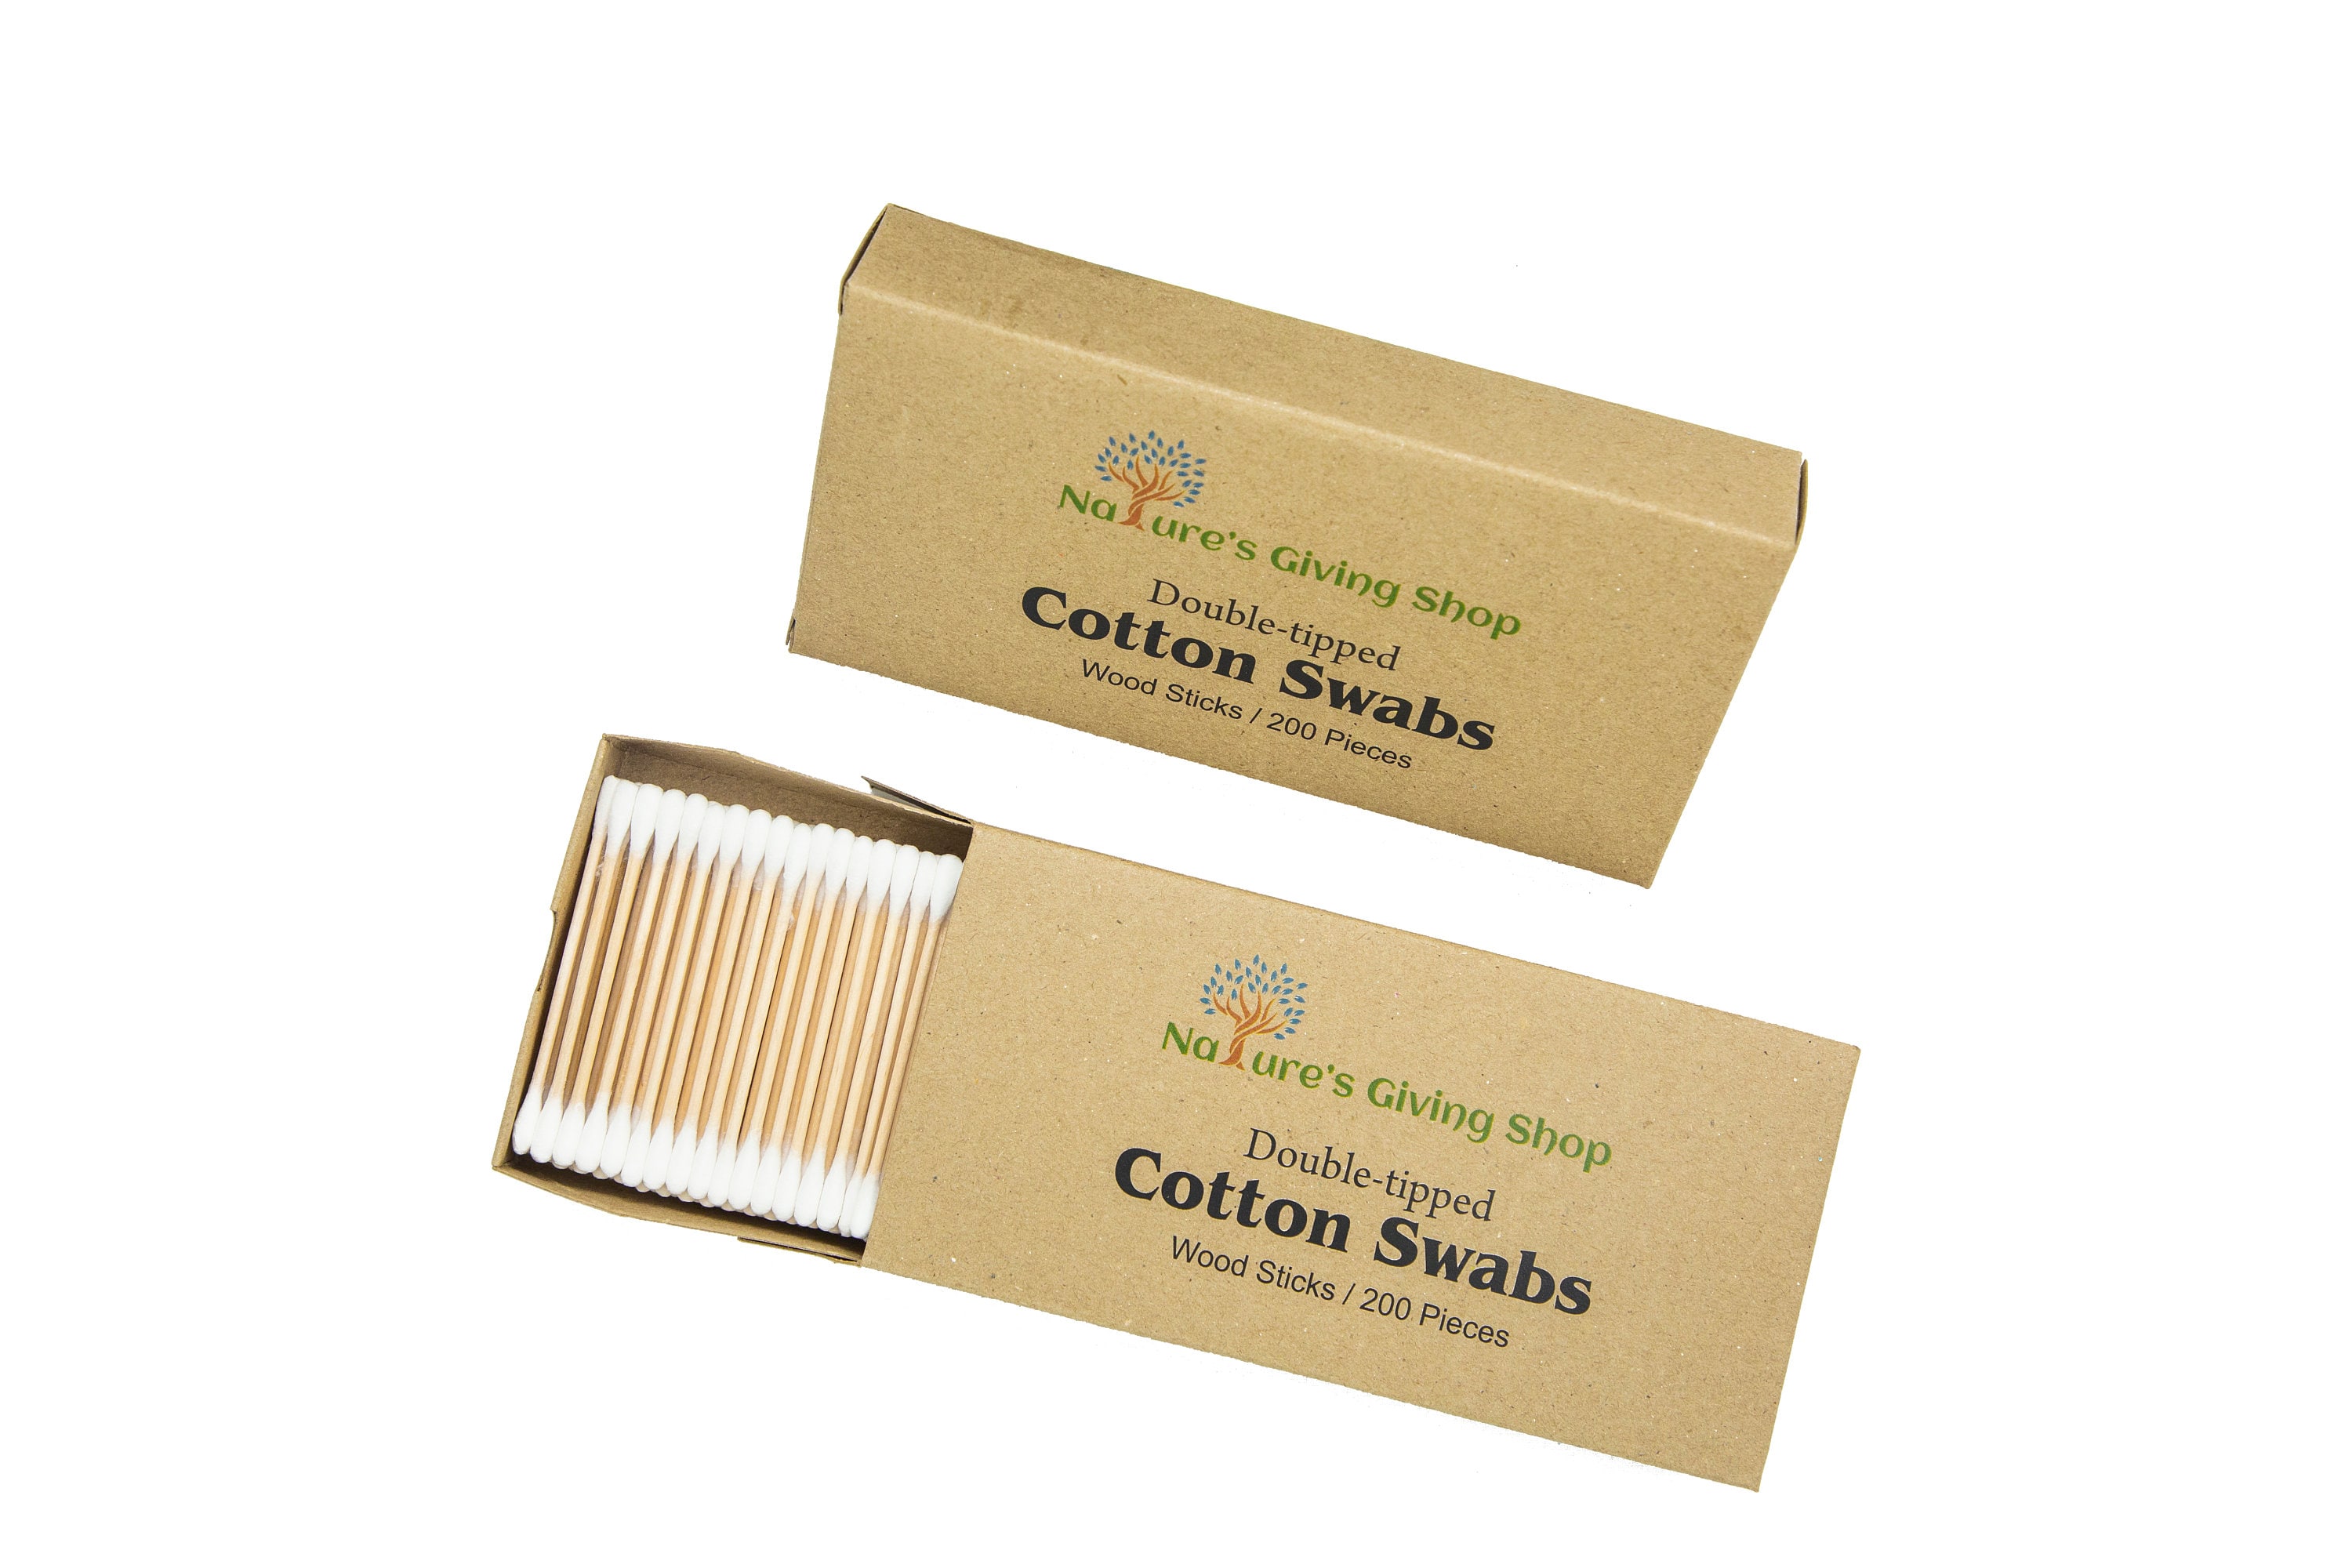 Crystal BLING Cotton Swabs Travel Size, 30 Count, Free Shipping Included. 